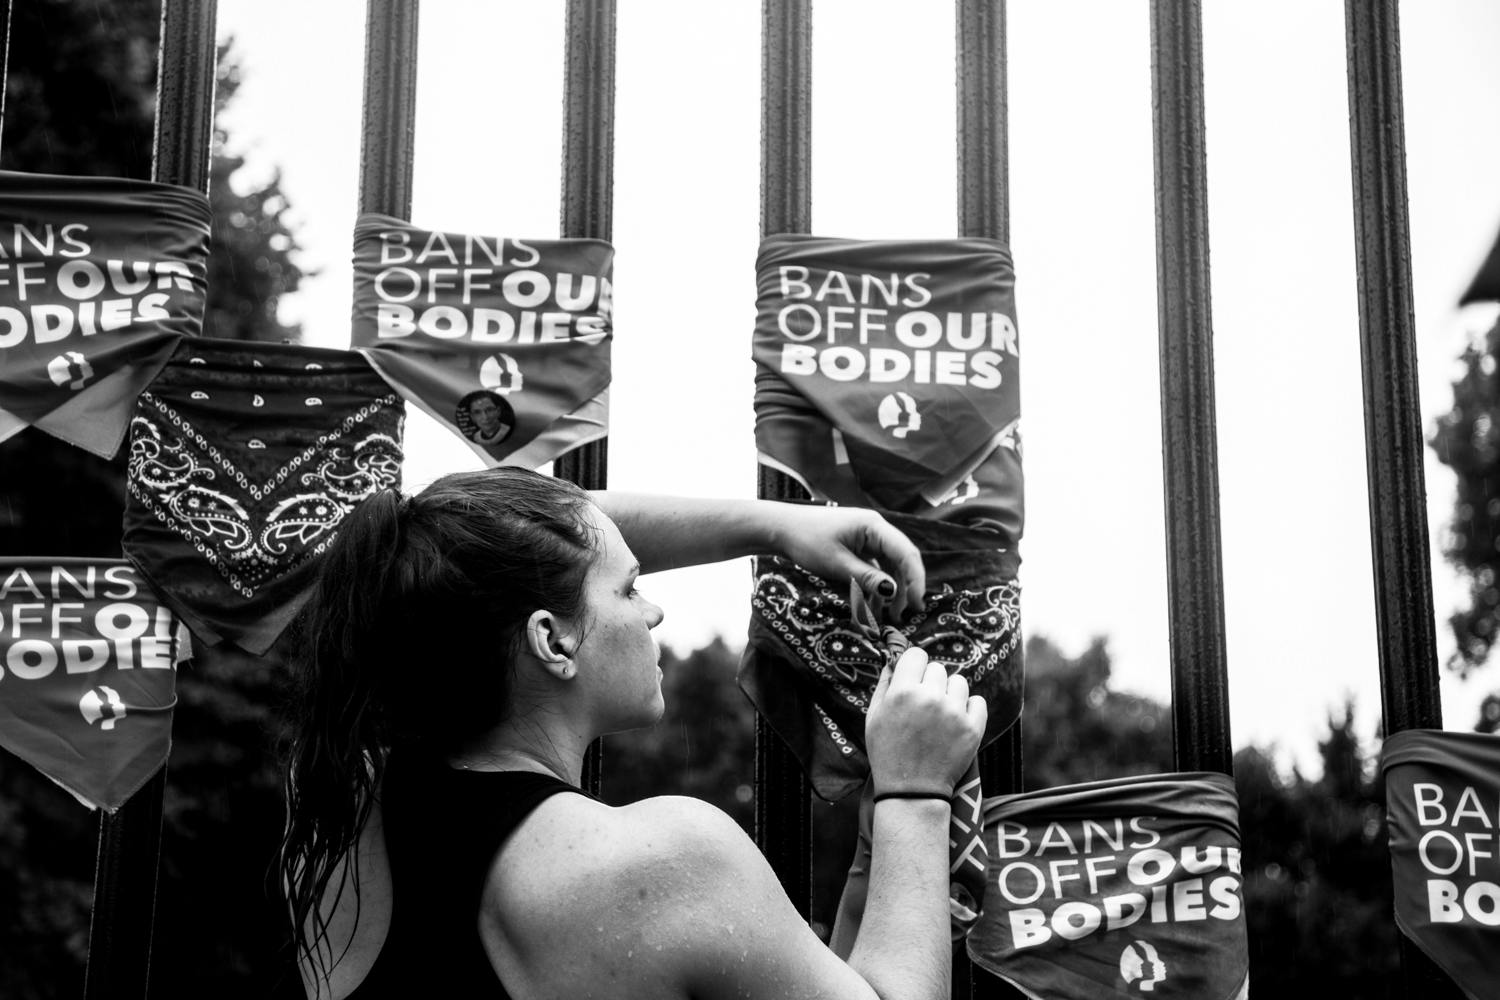 One planned act of disobedience was to tie our Bans Off Our Bodies bandanas to the White House fence in silent protest of losing our human rights of autonomy over our own bodies. 